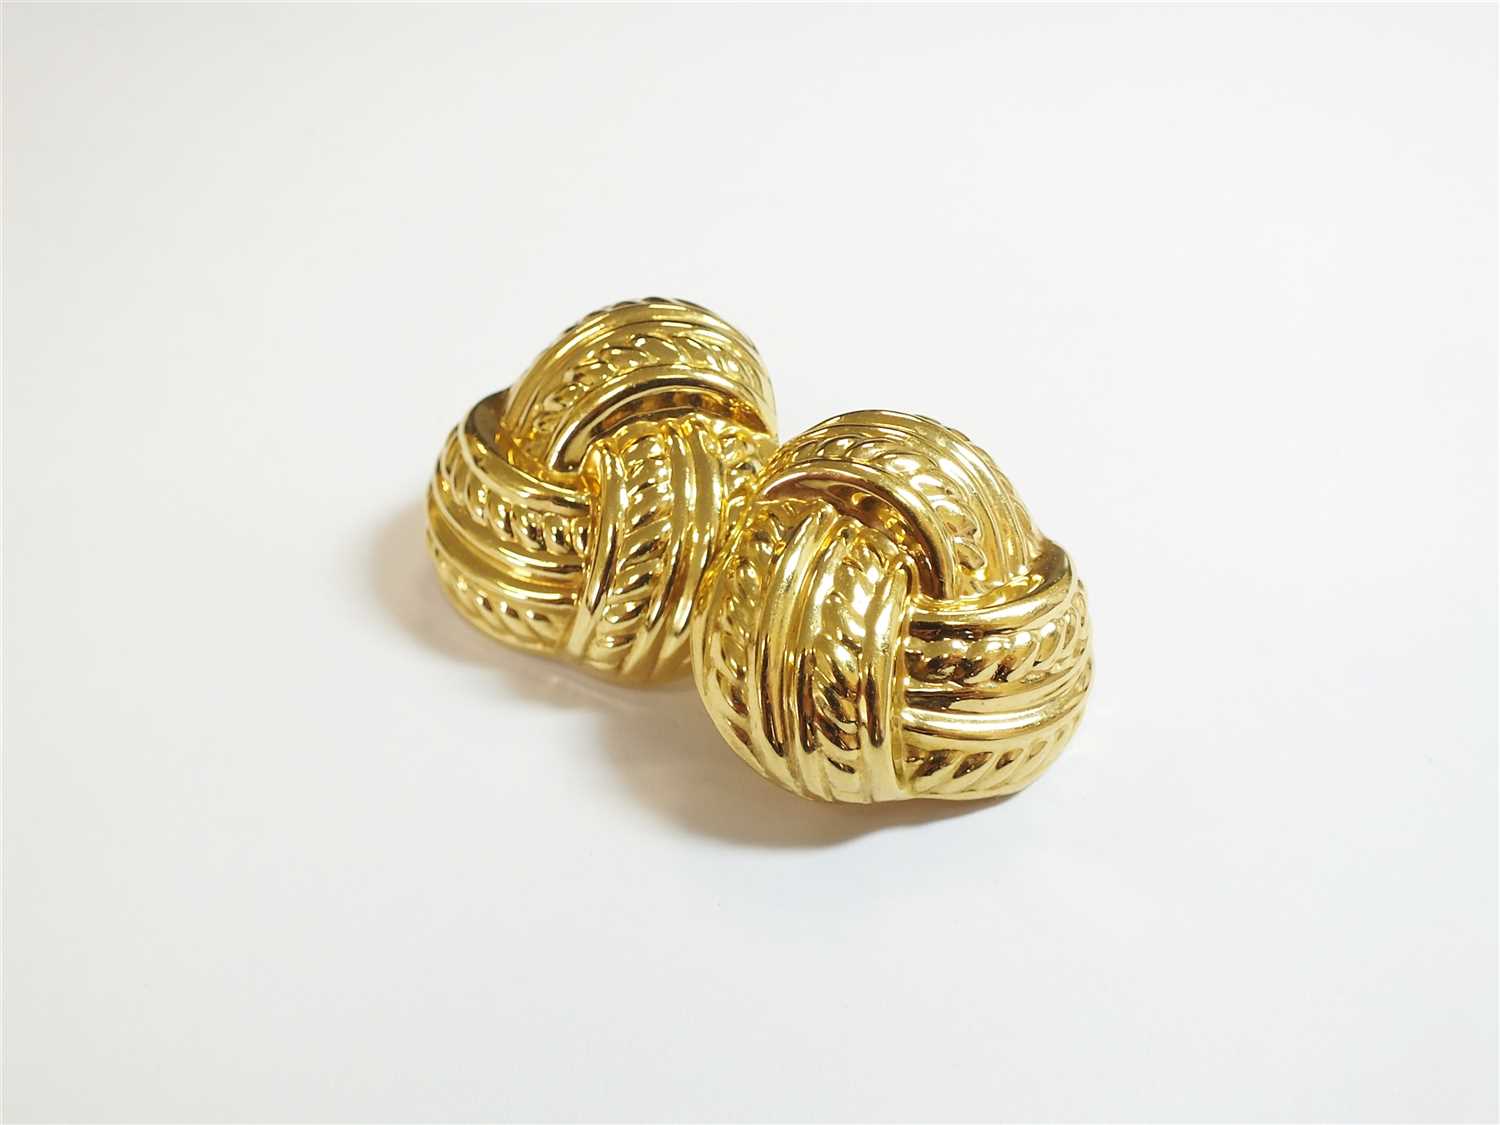 Lot 90 - A pair of knot earrings